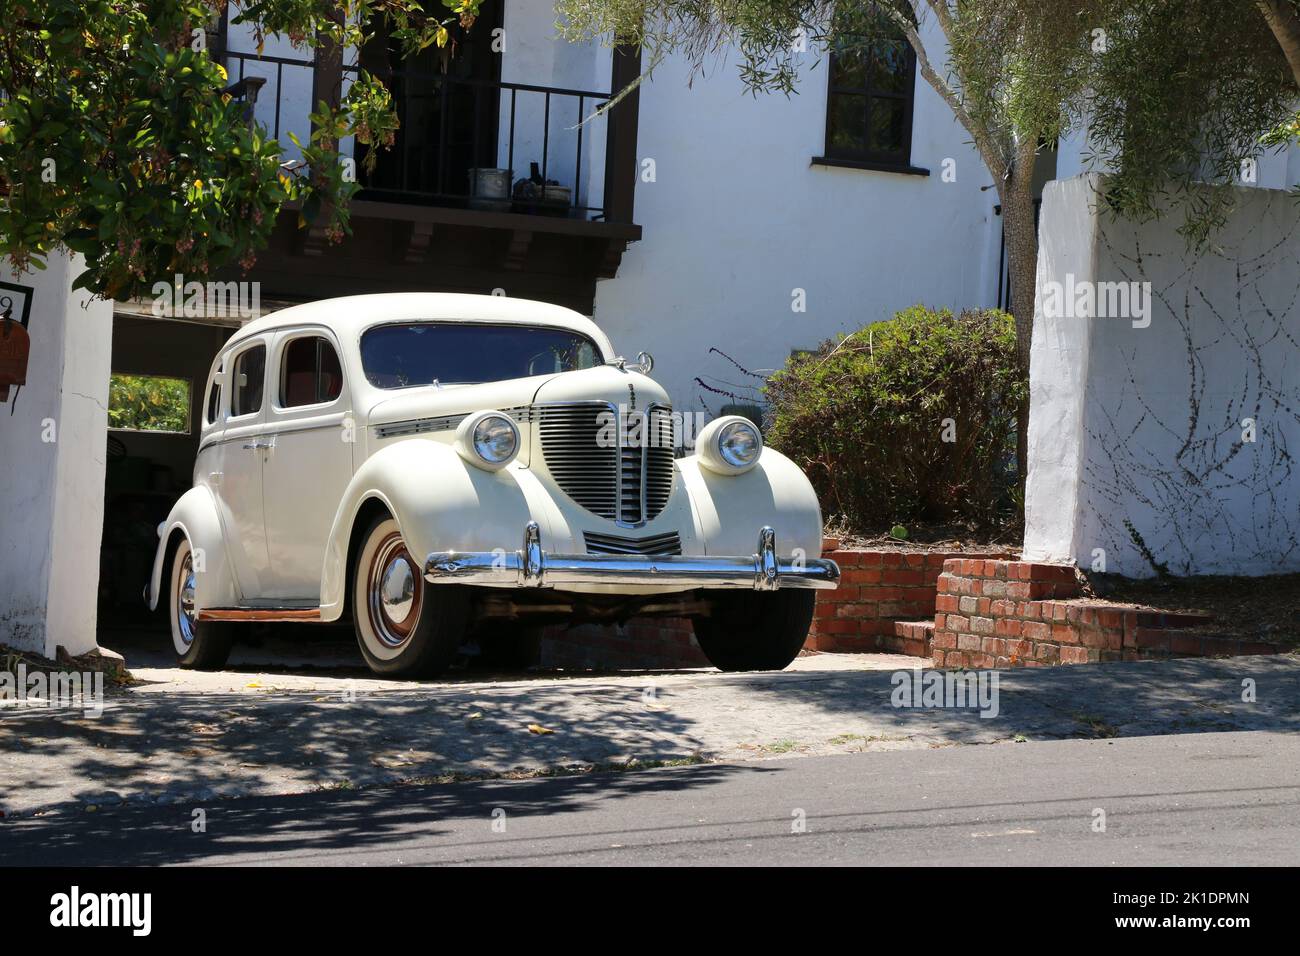 Monterey, CA, USA - 18 Aug 2022: Beautiful, classic cream colored DeSoto in pristine condition is parked in a driveway in Monterey during Classic Car Stock Photo